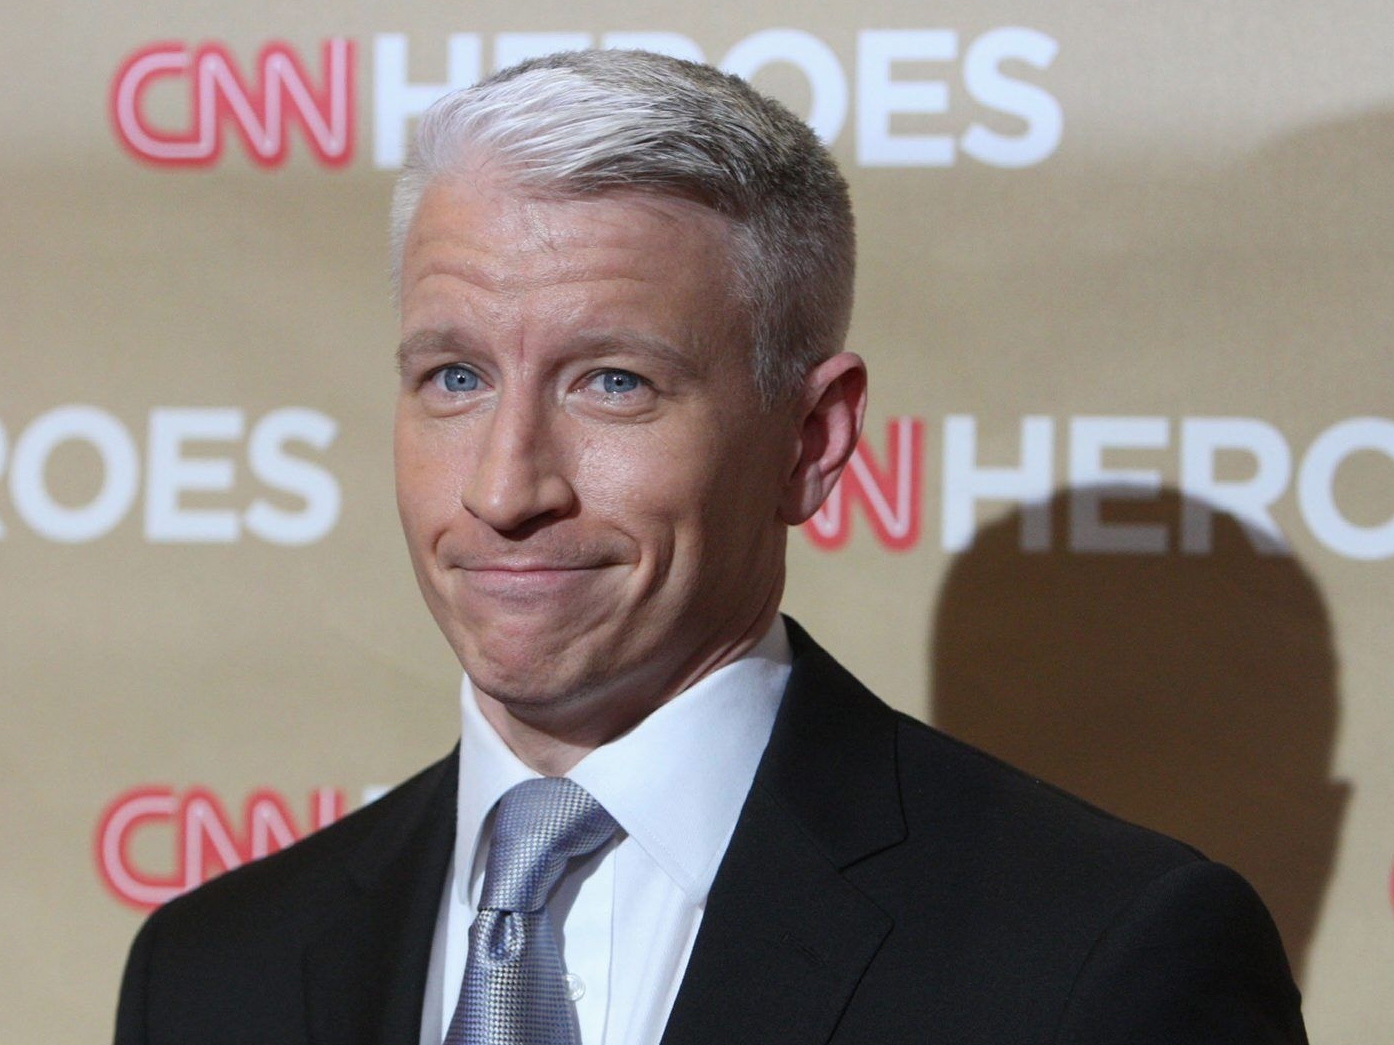 Anderson Cooper's Talk Show to End